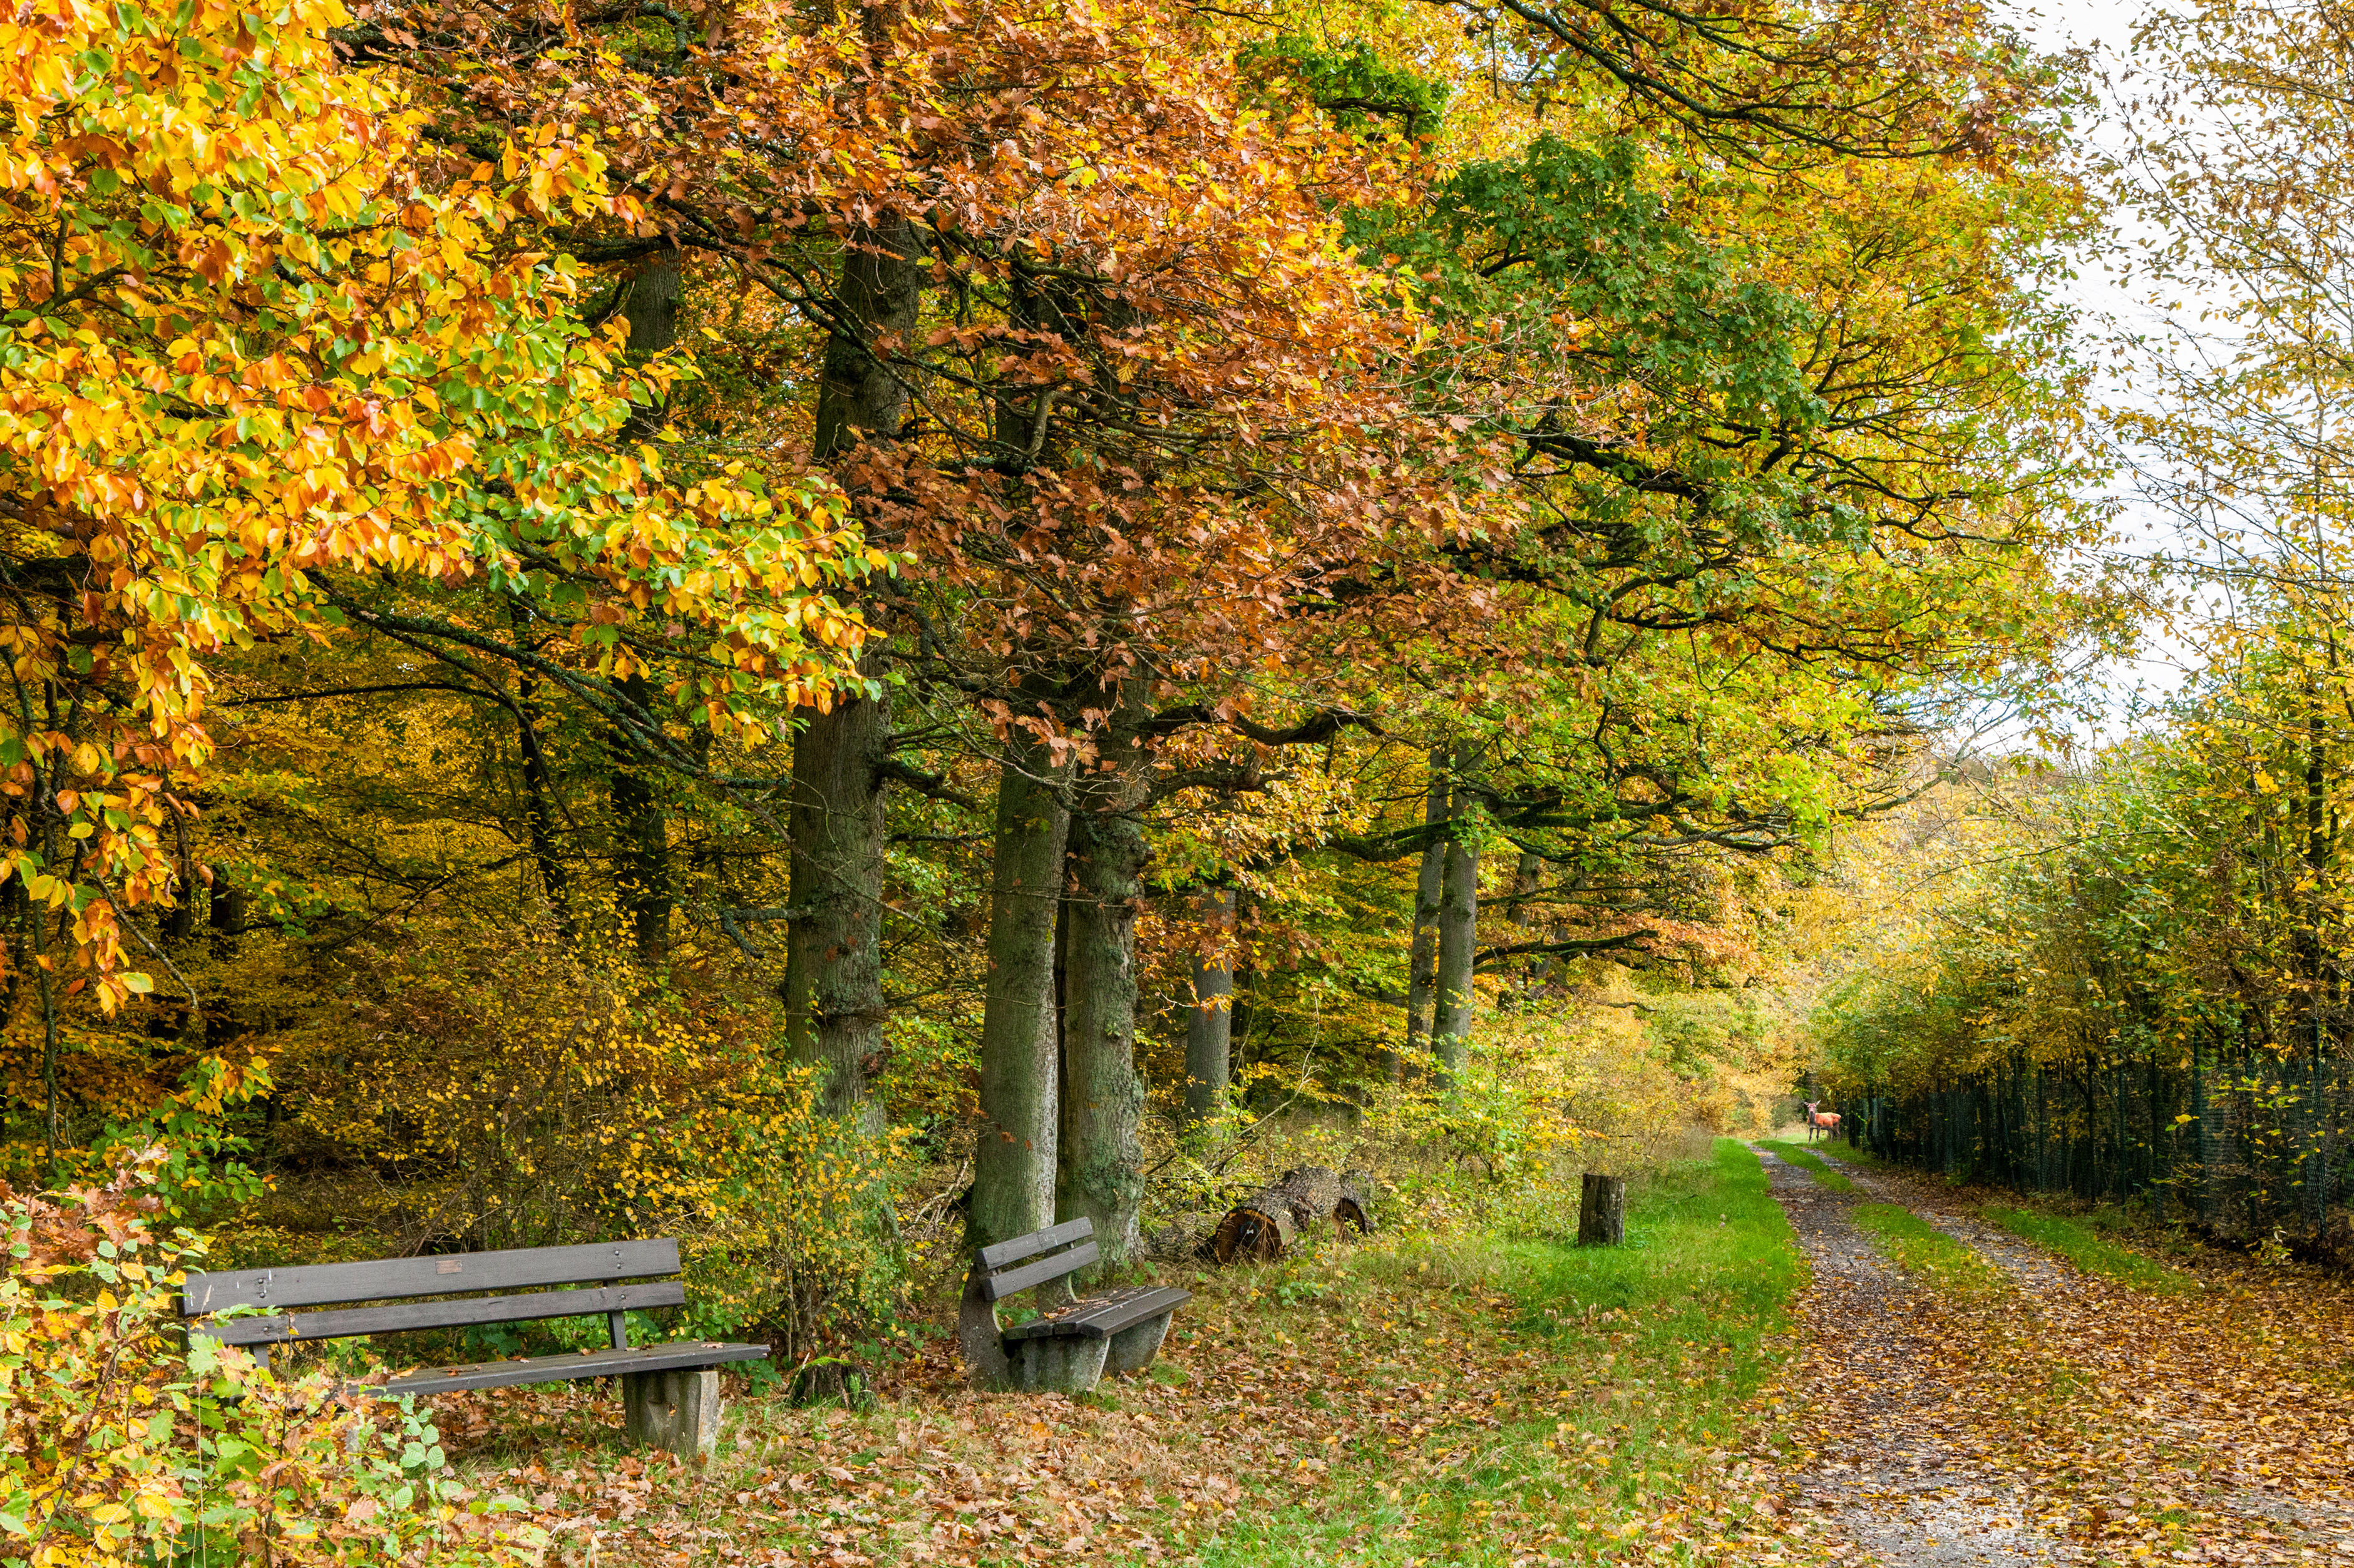 Autumn park with wooden benches and fallen leaves